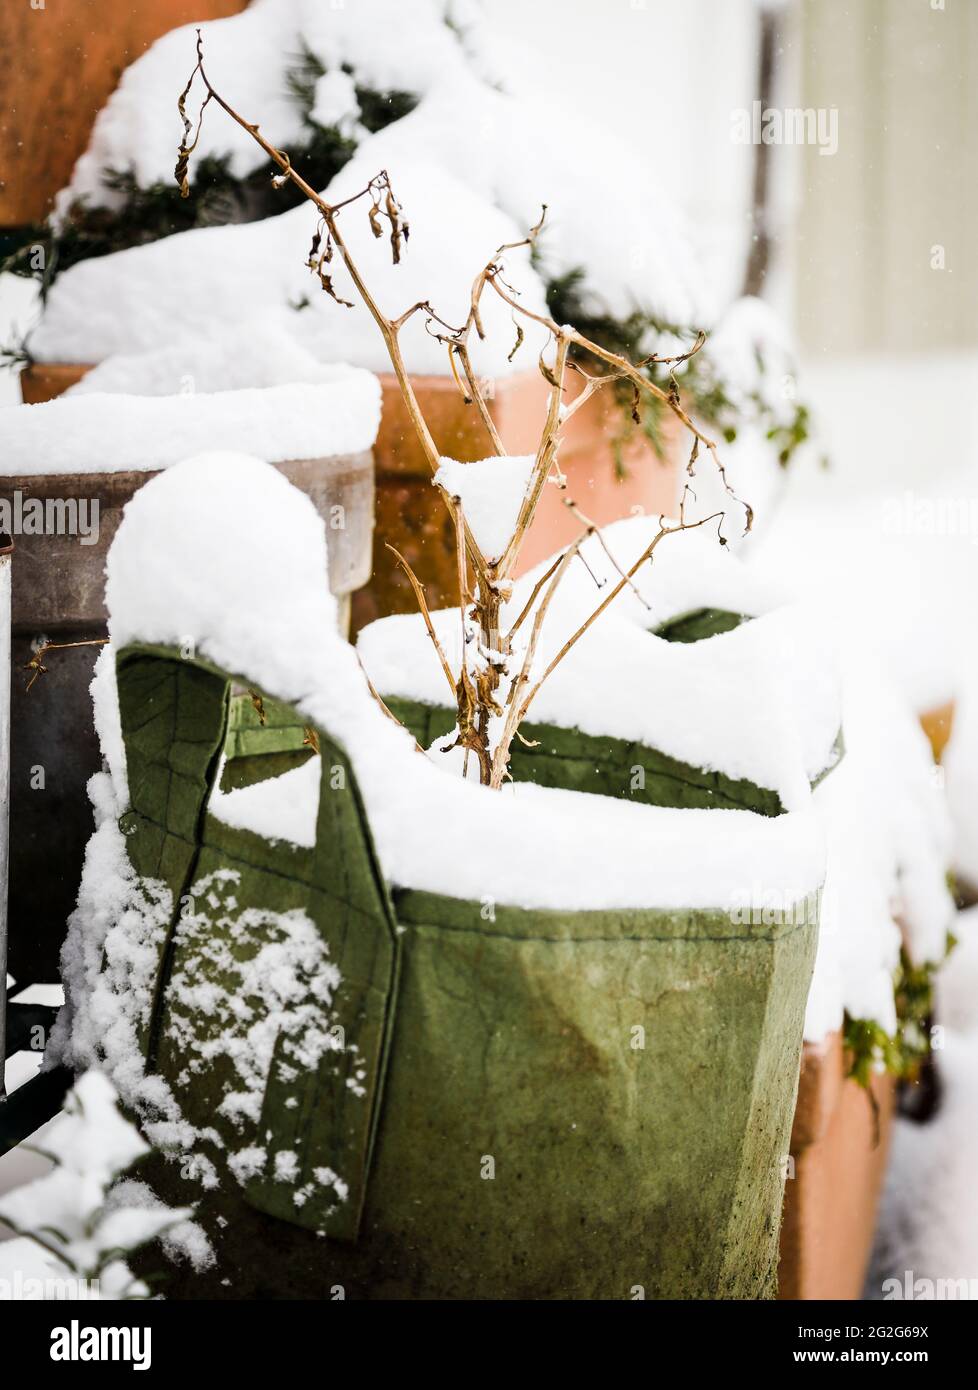 Planting sack in the winter in the snow Stock Photo